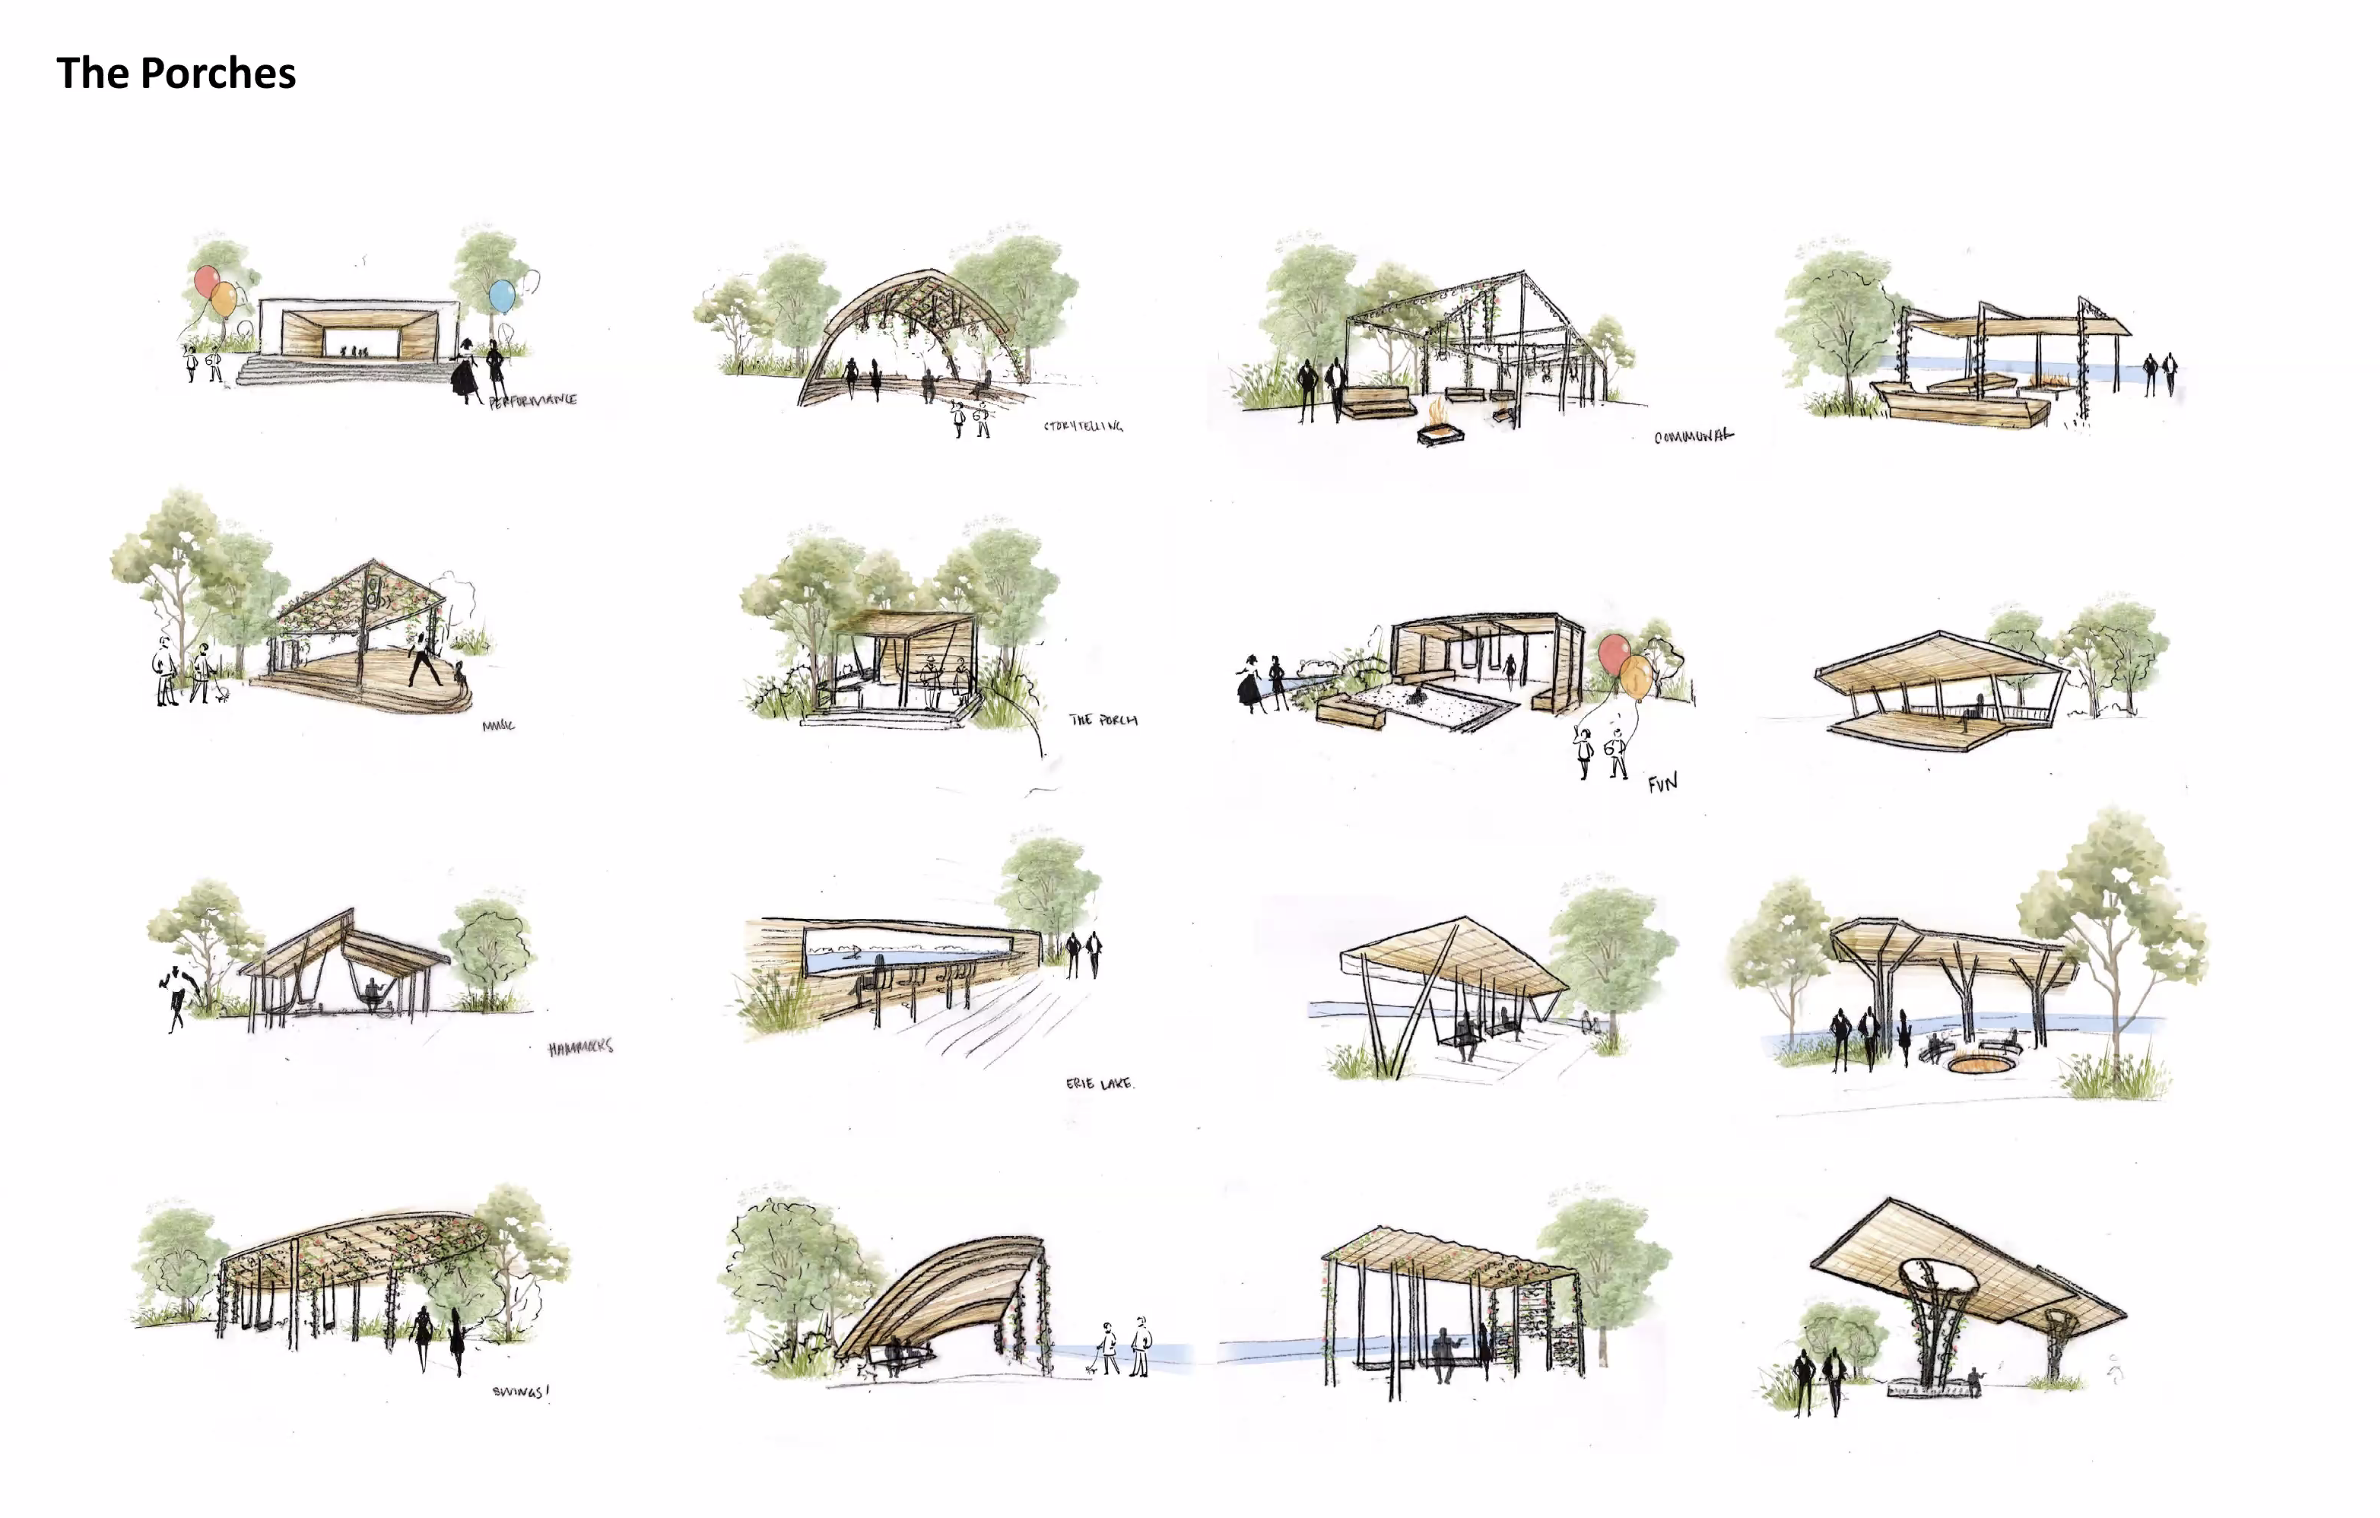 Renderings of covered areas in rows and colums